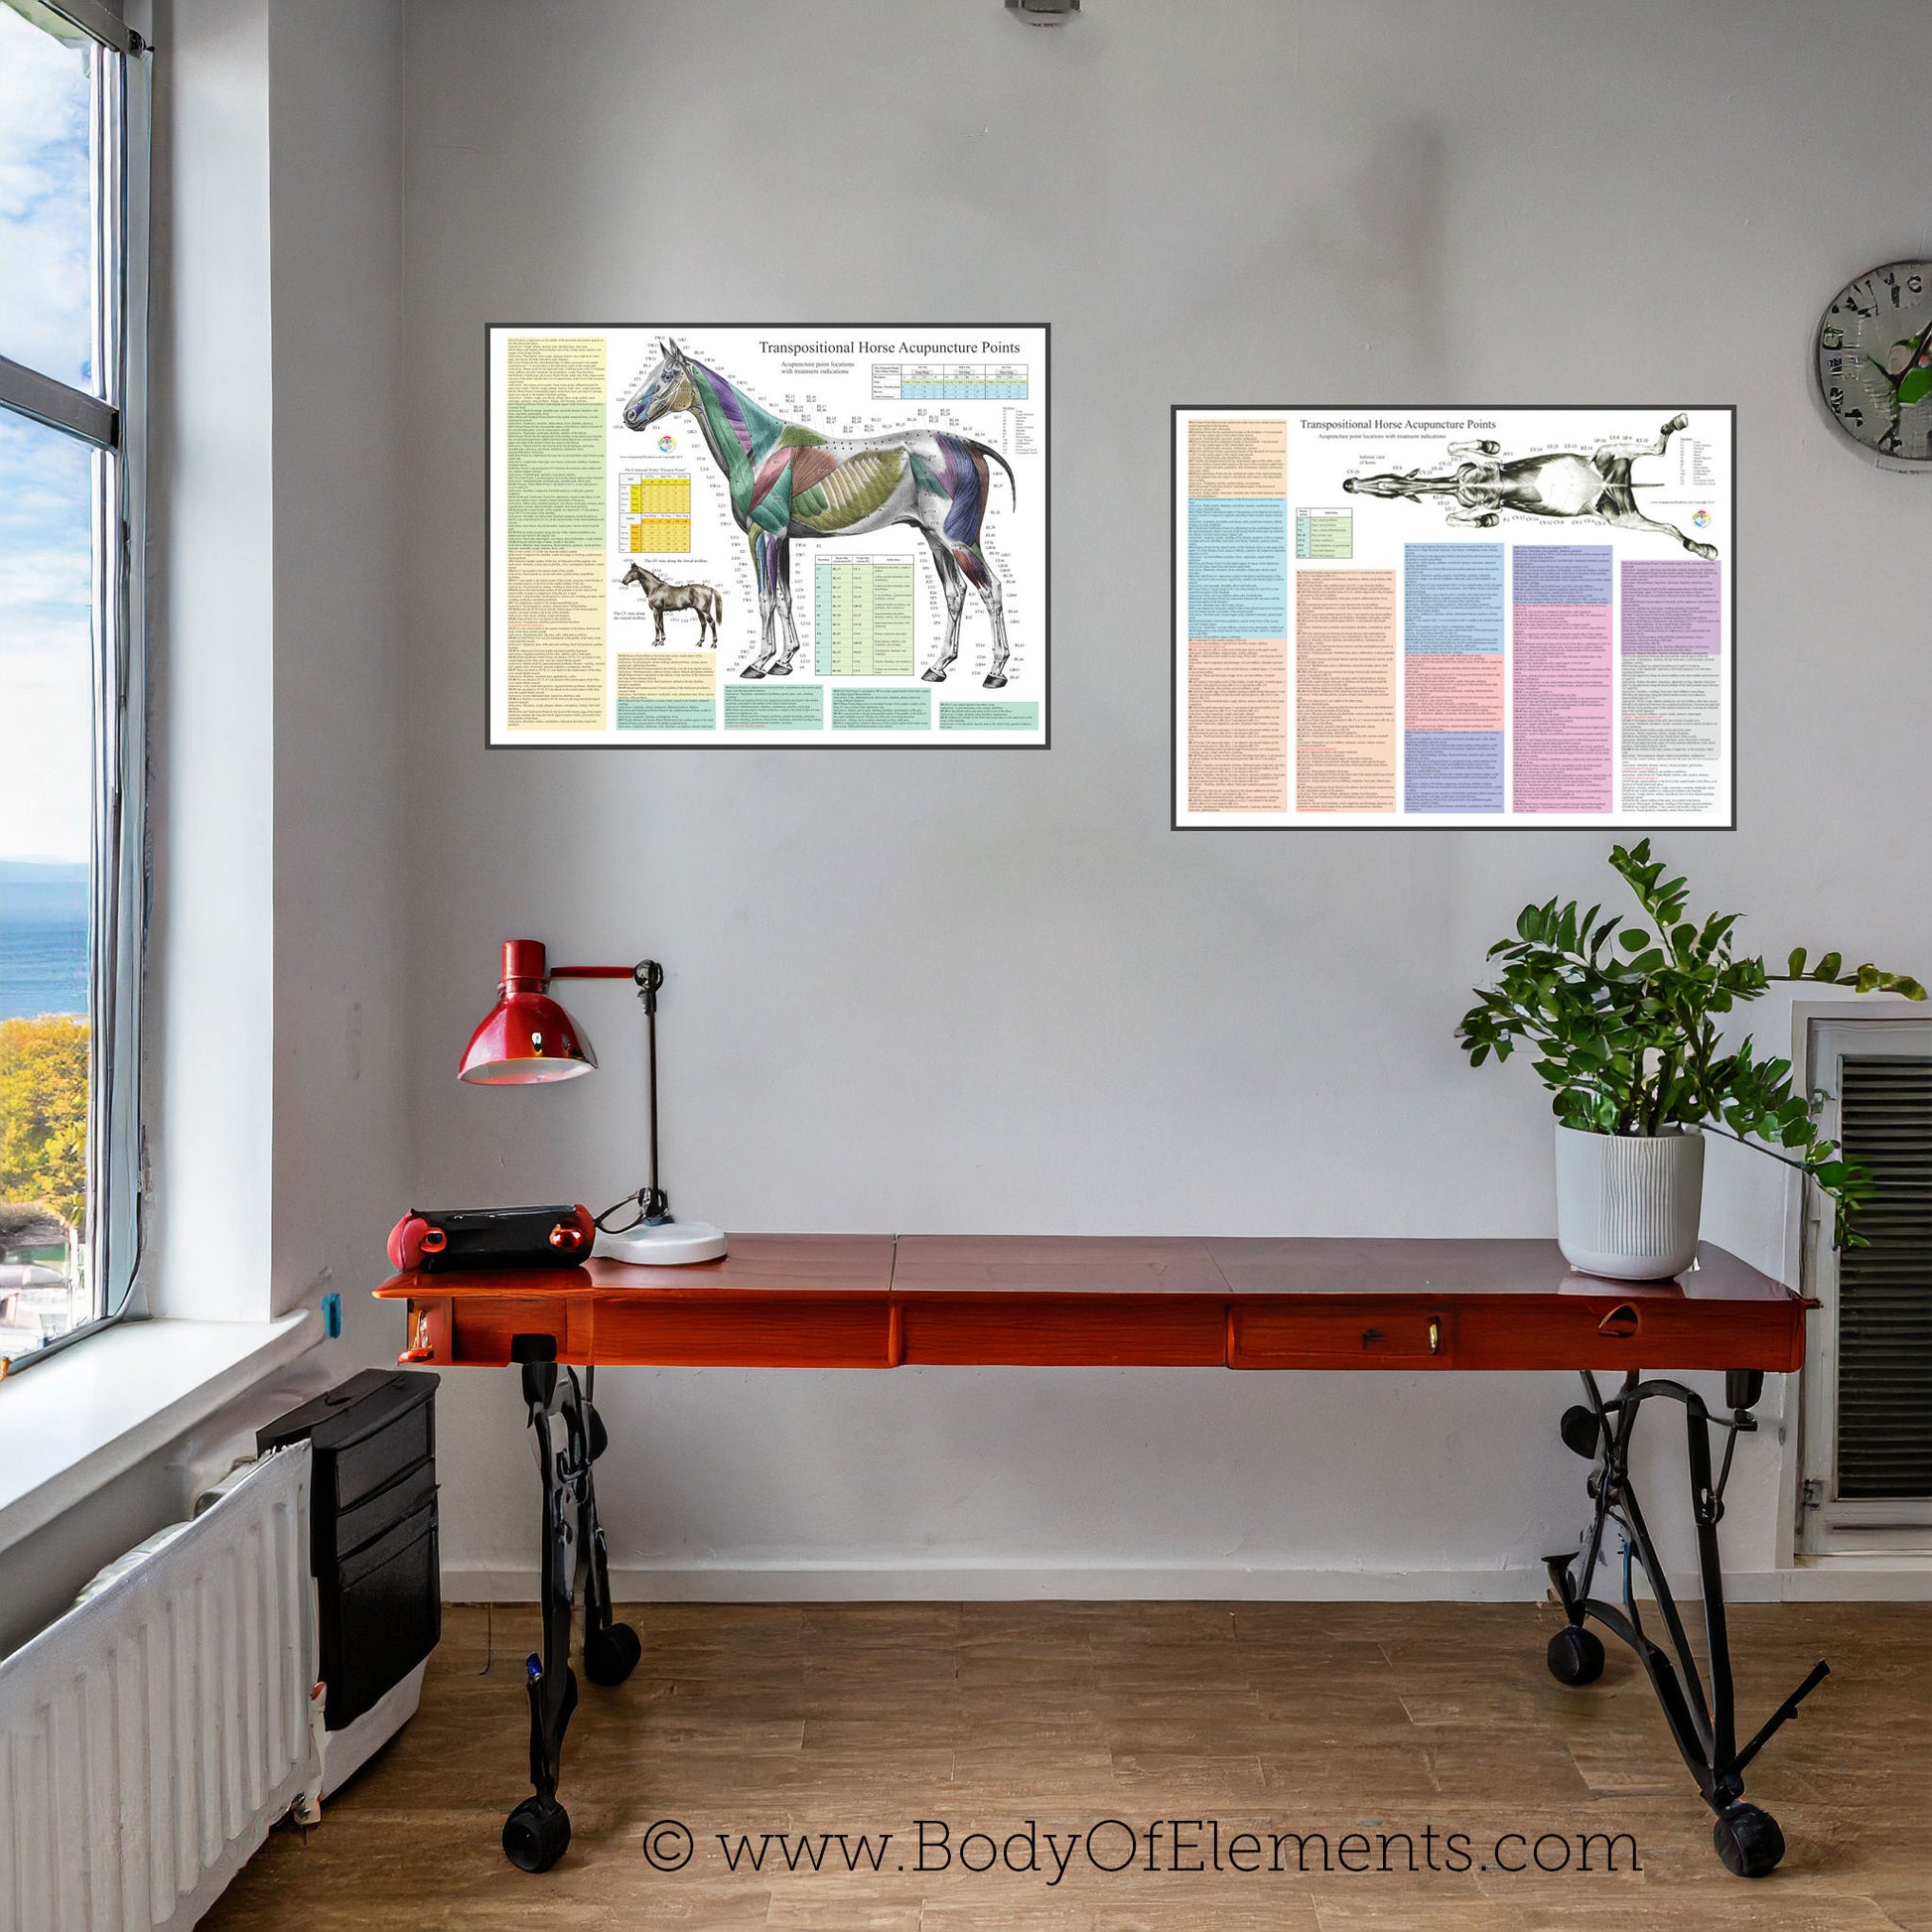 Acupuncture veterinary clinic horse wall charts